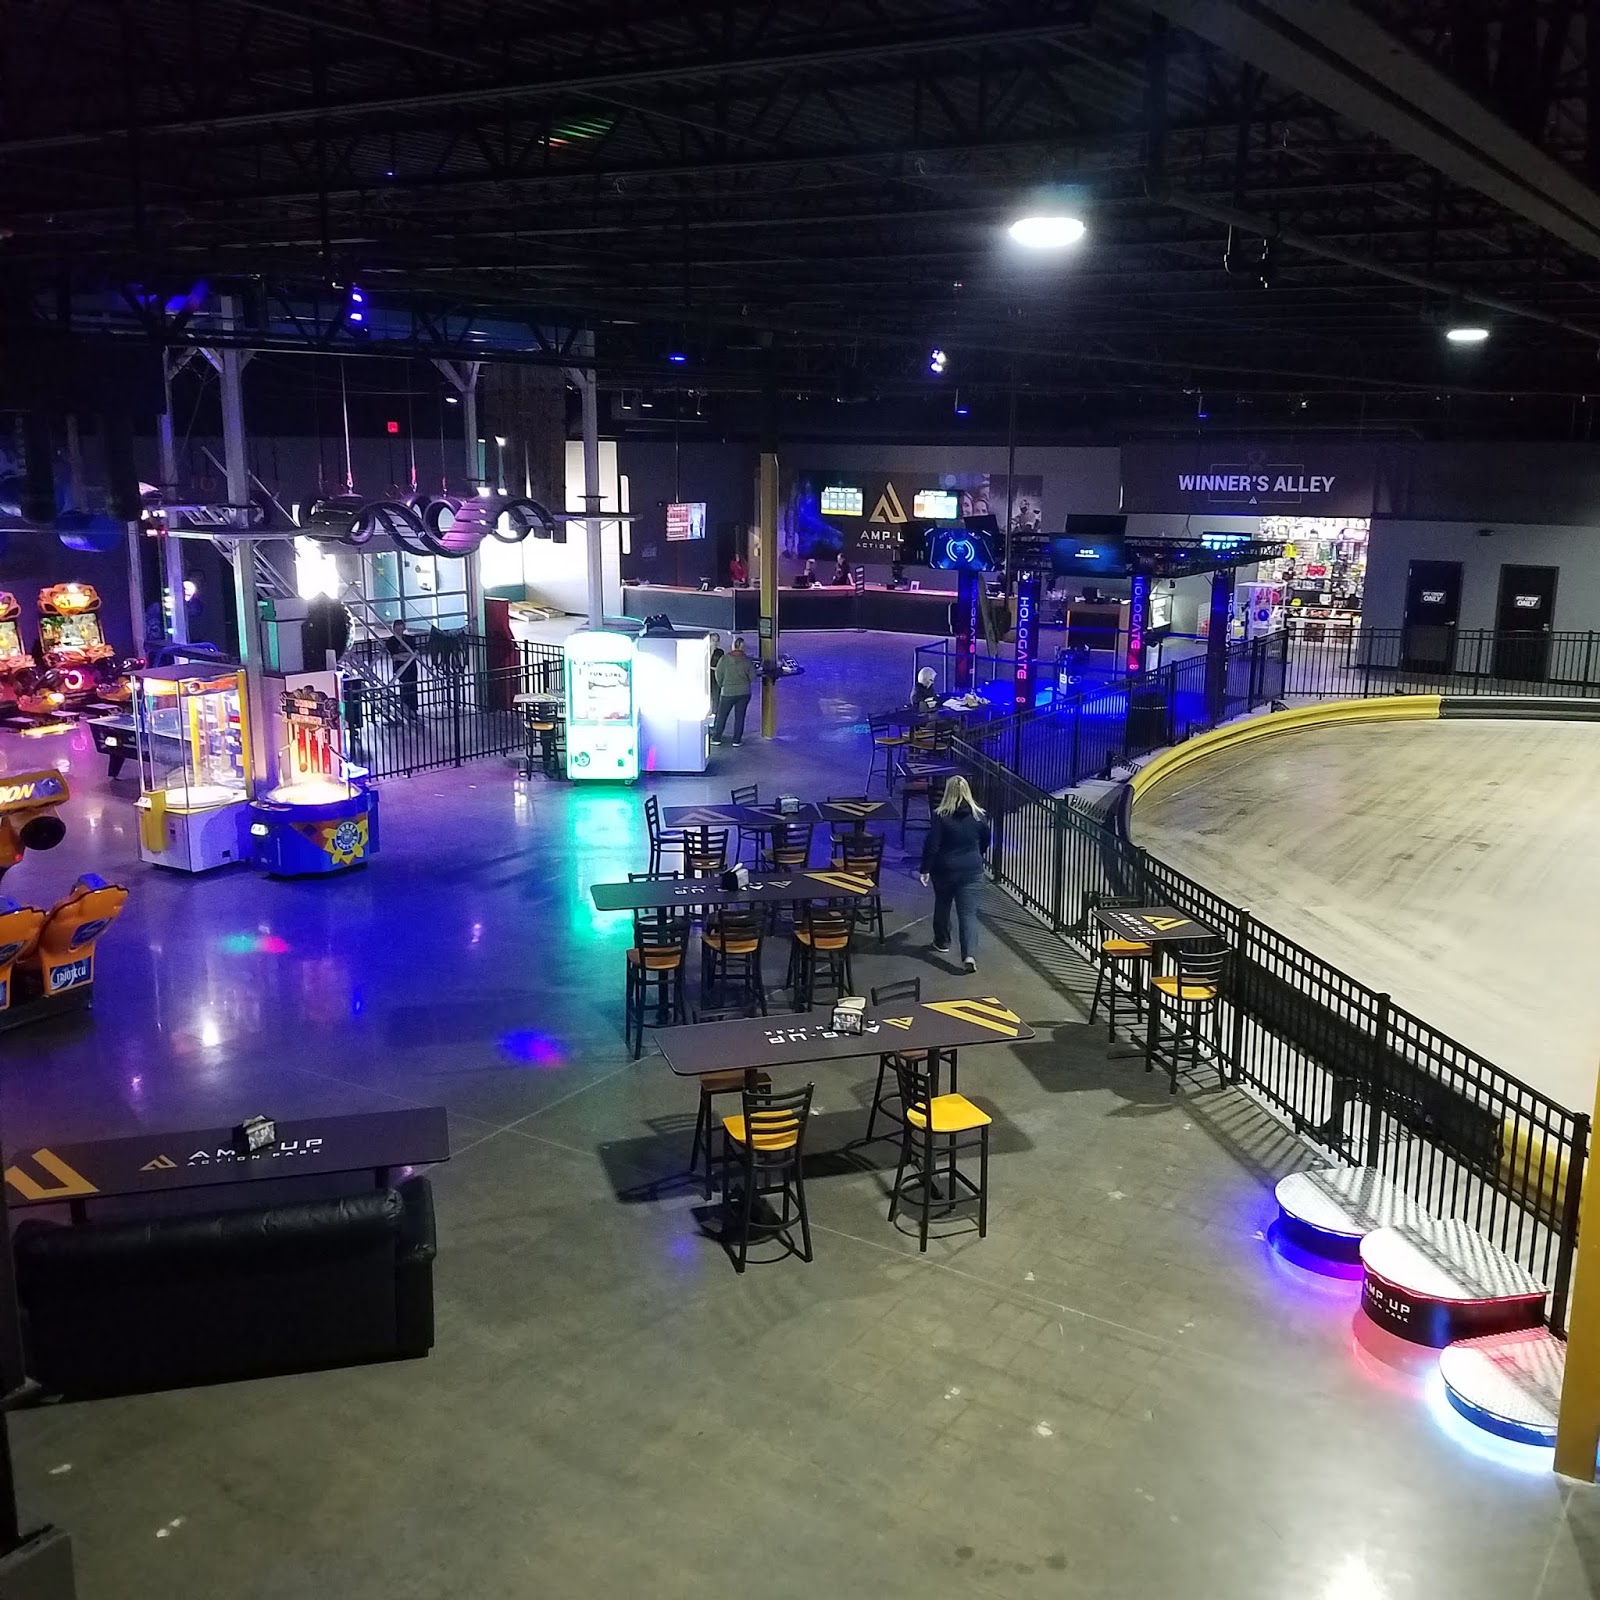 Rent The Facility - Amp Up Action Park